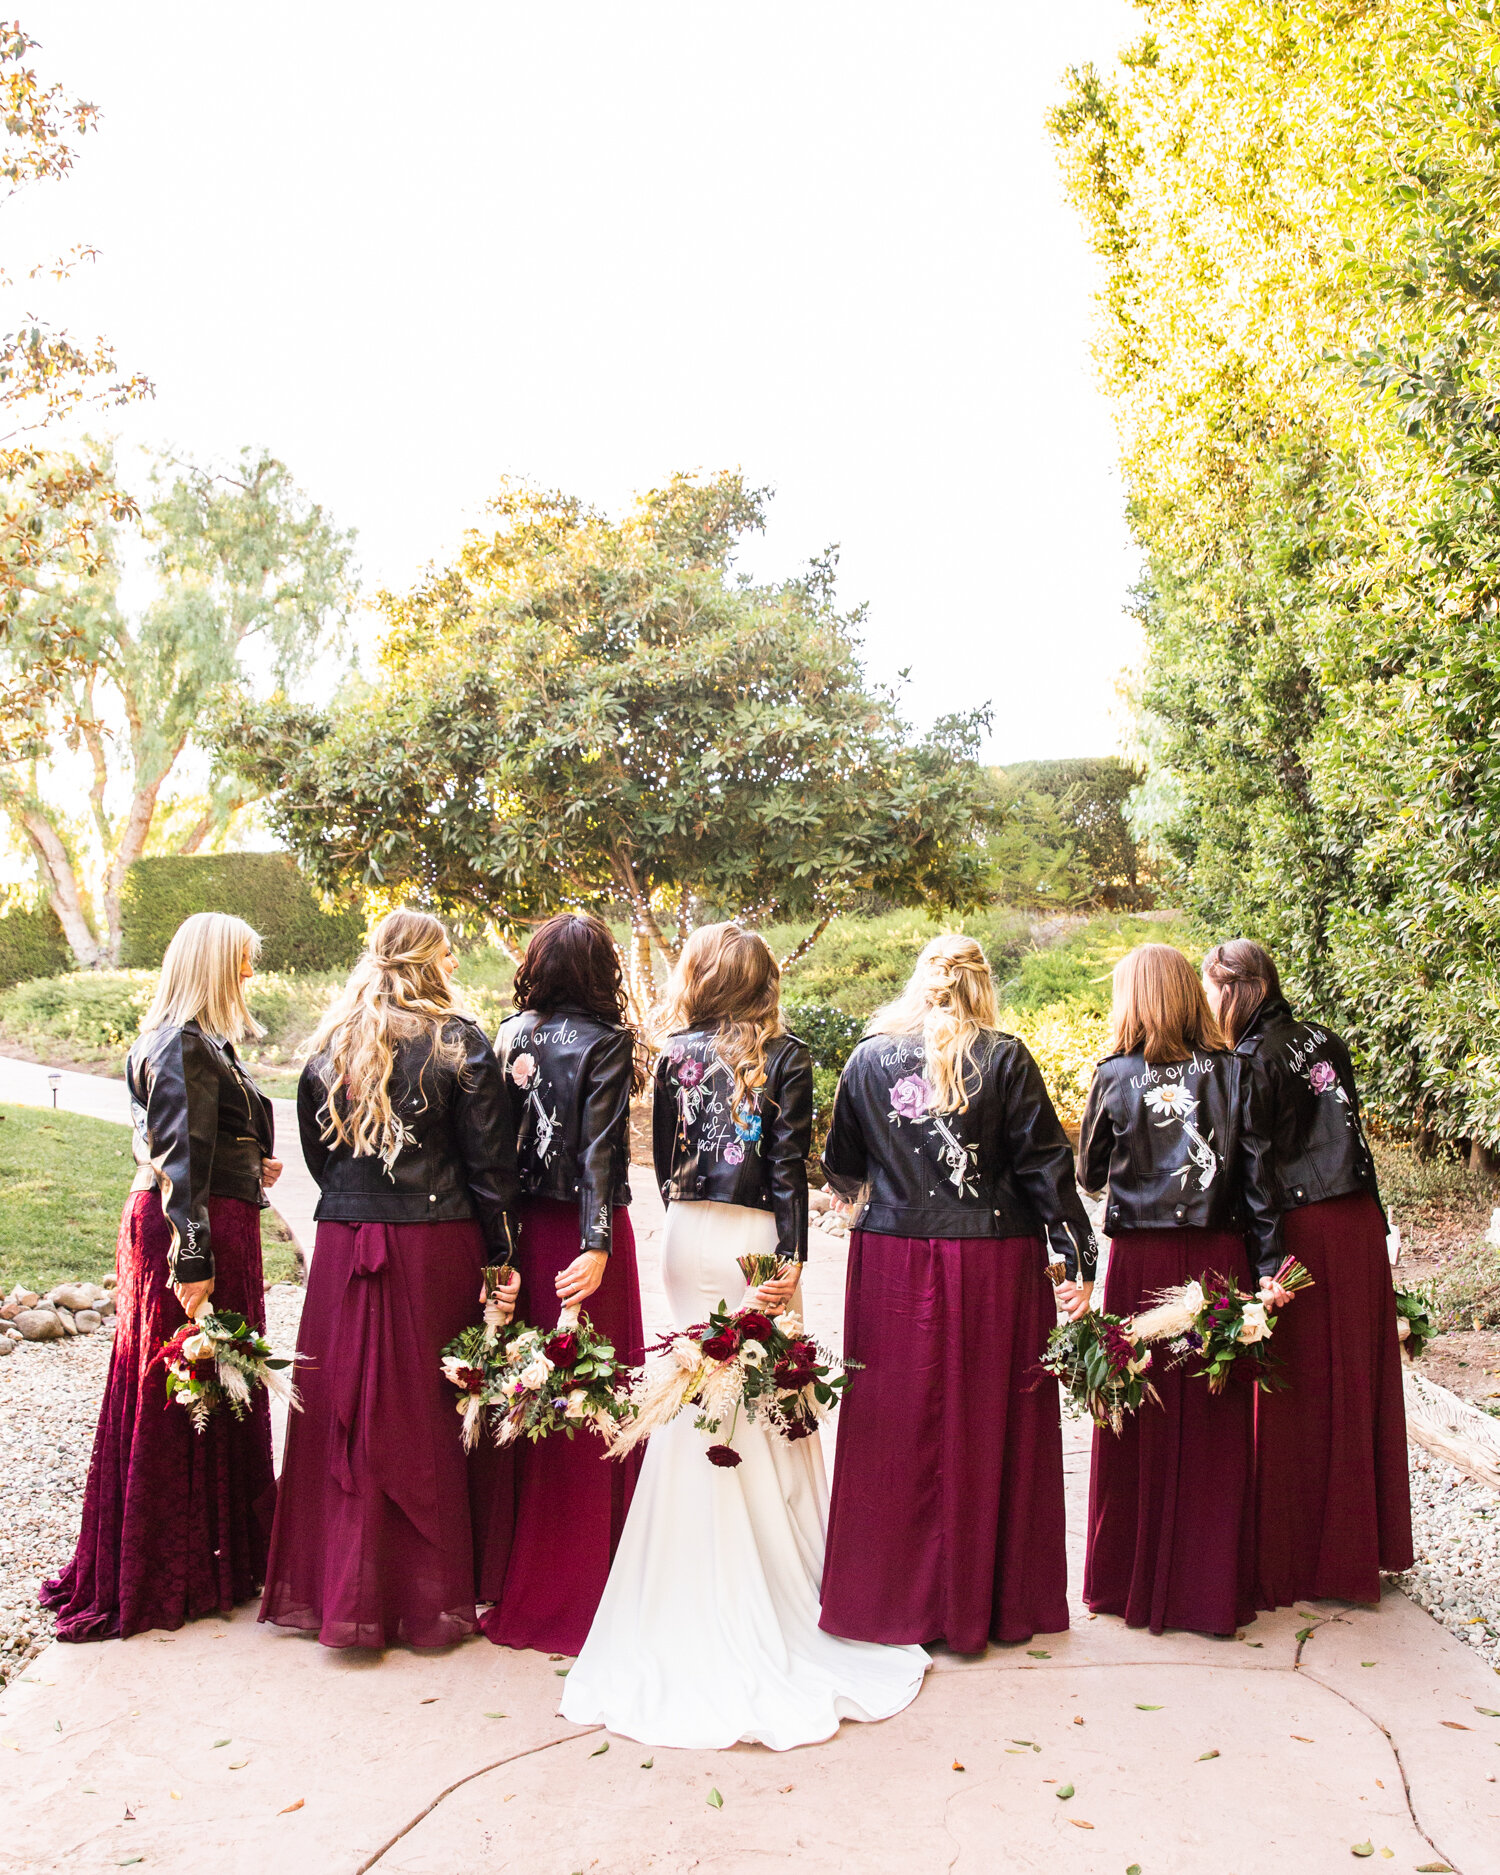 Painted leather jackets for bridal party